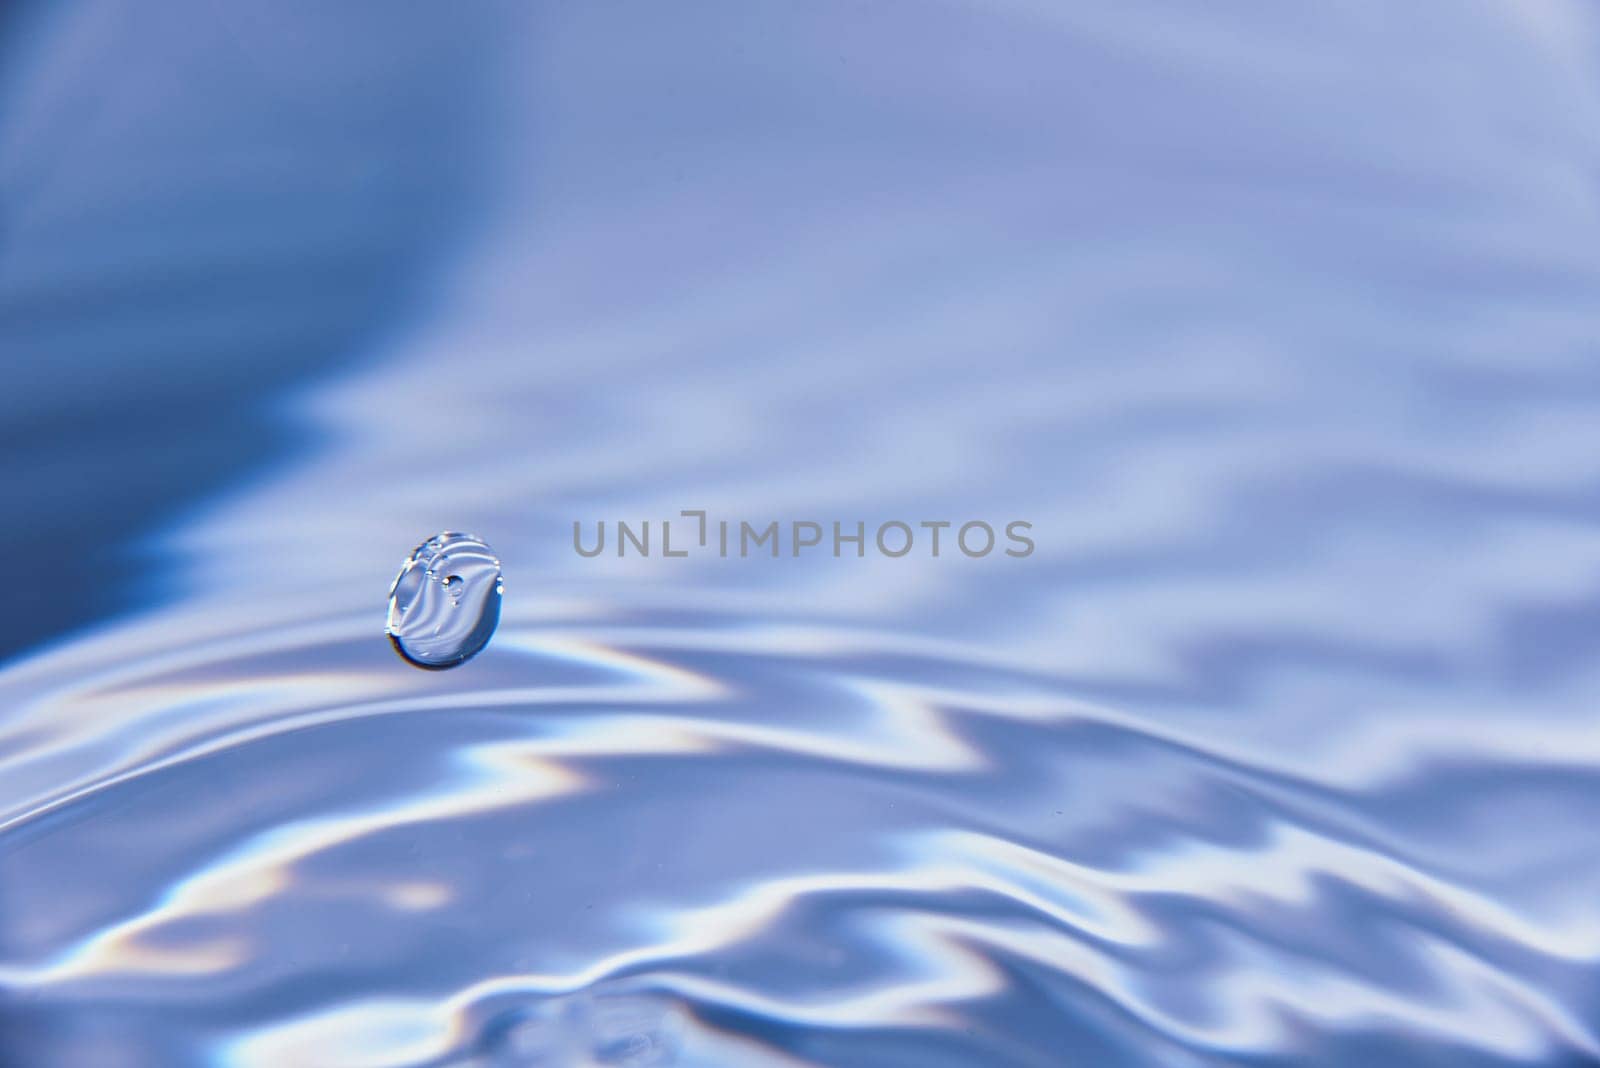 149.One or more drops of water splashing into waves and undefined shapes. Wallpaper by raul_ruiz